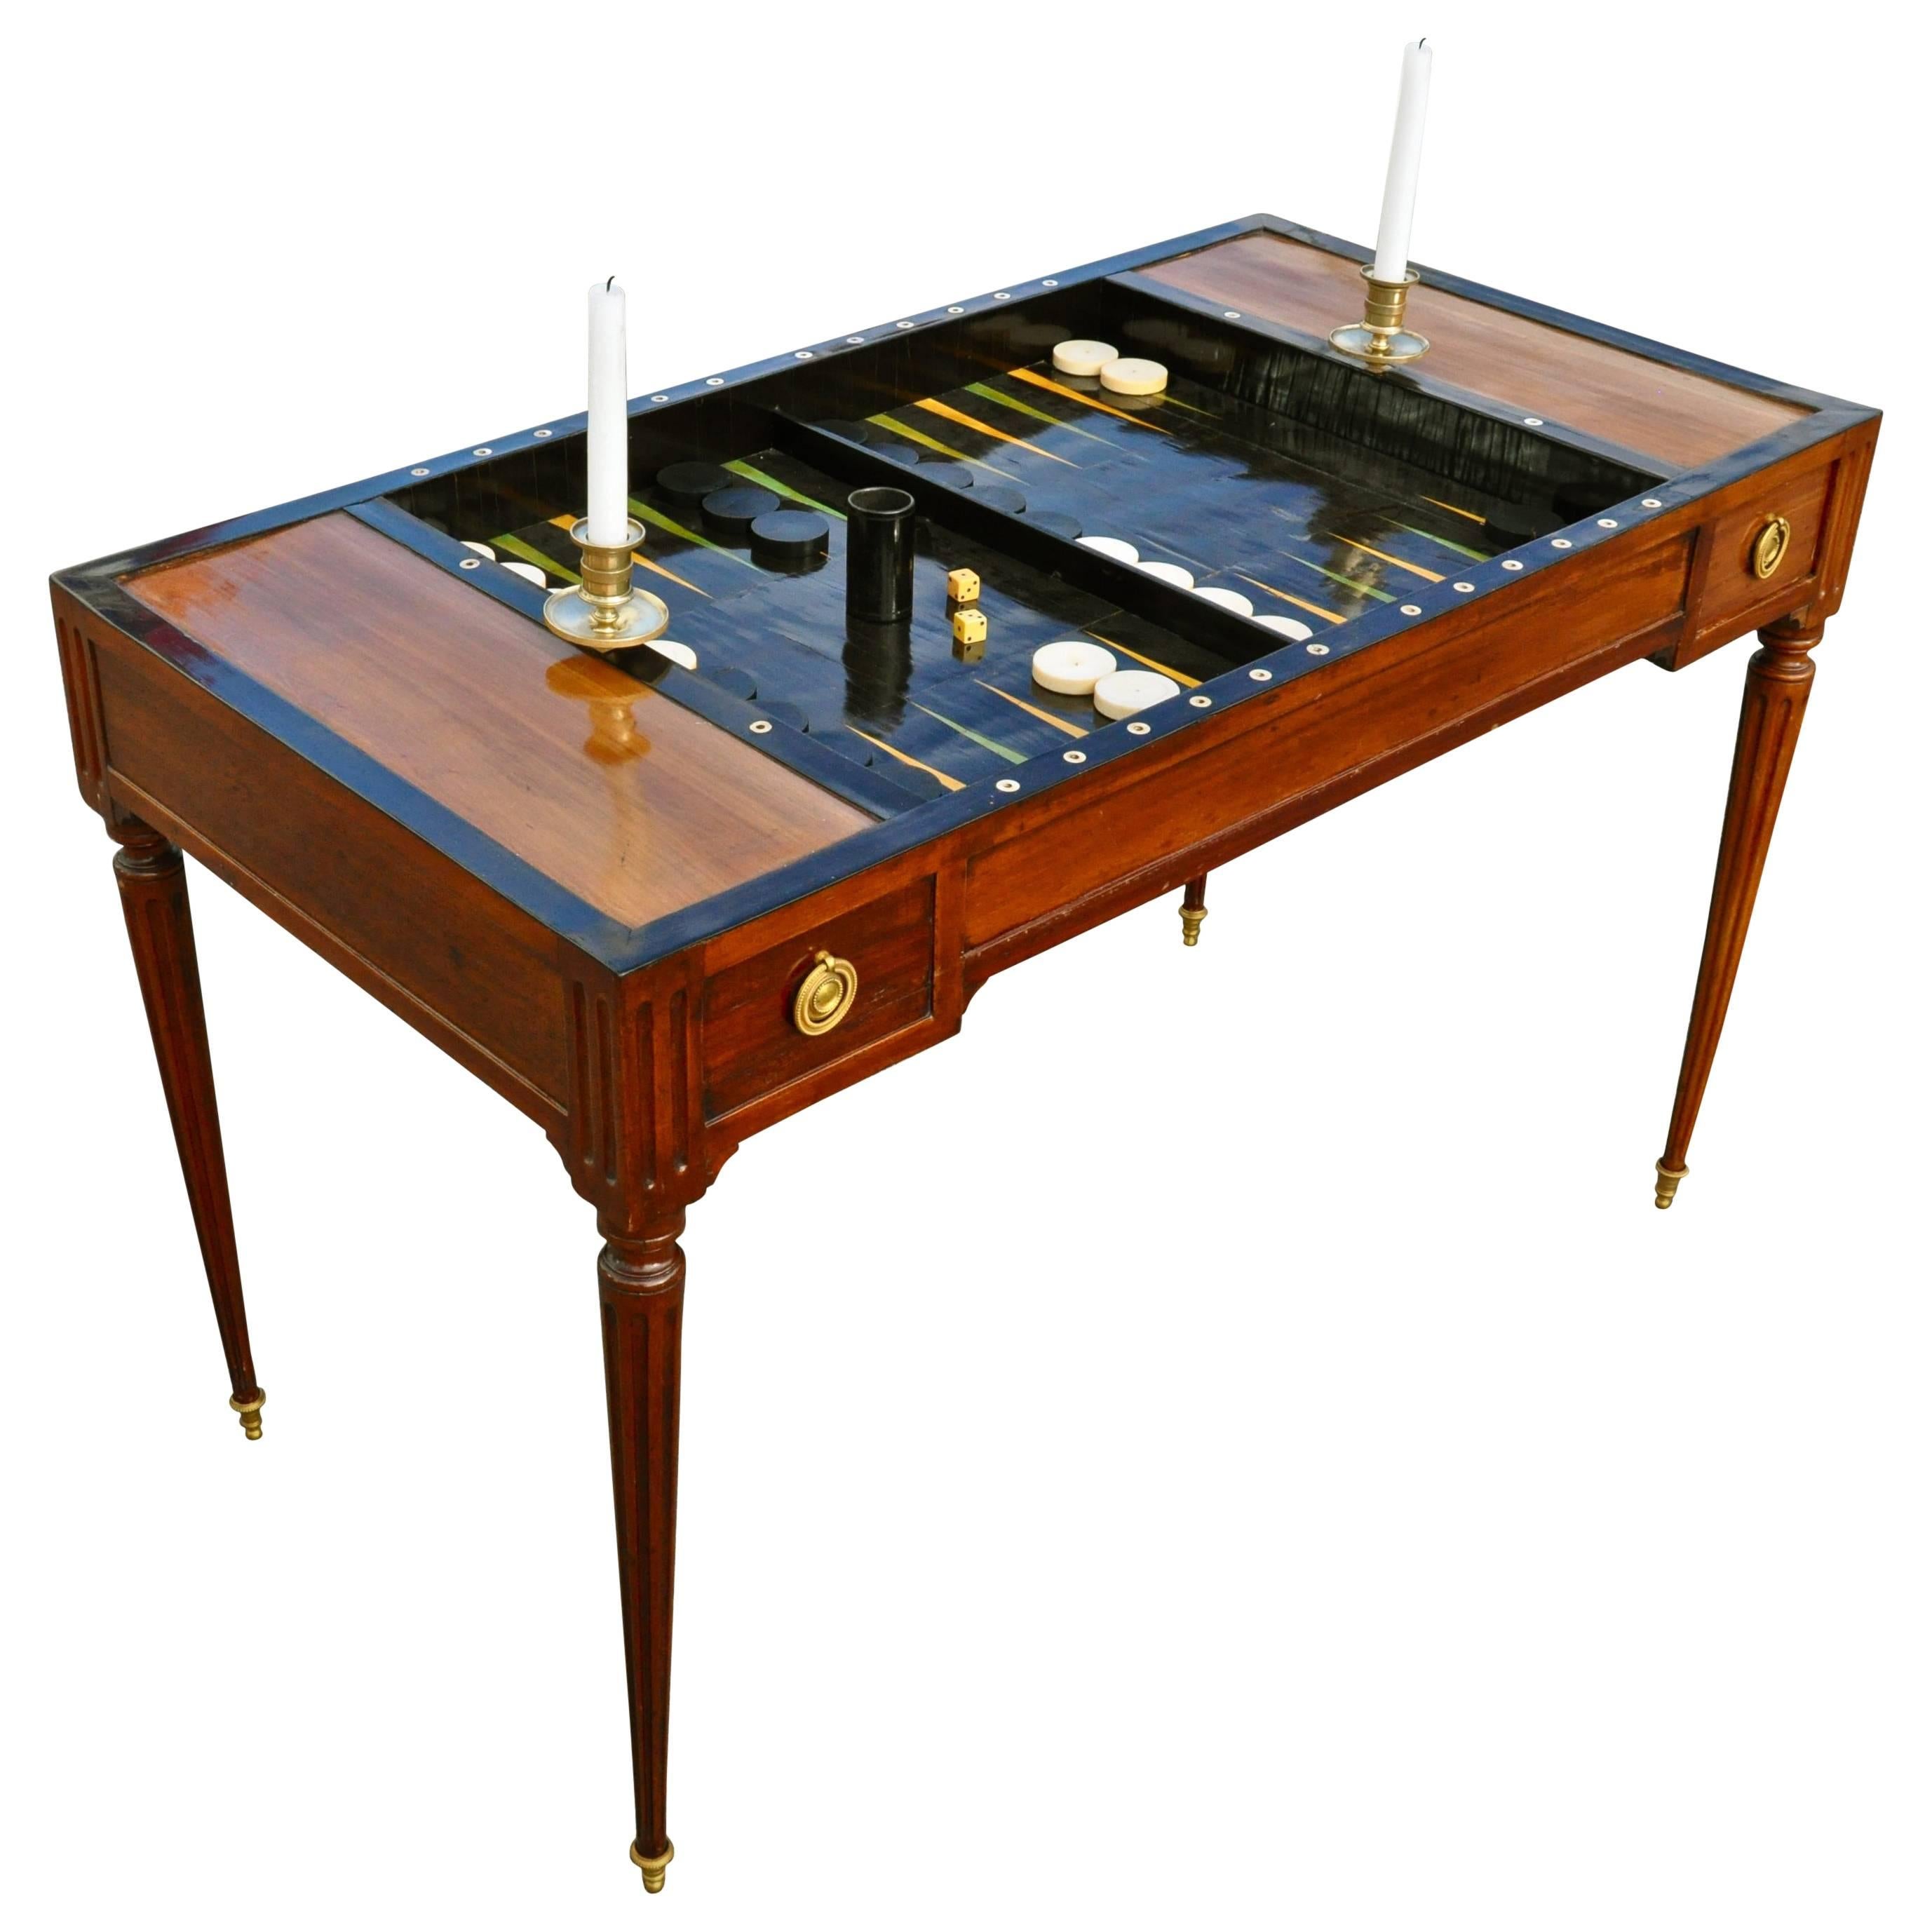 Period 18th Century French Directoire Backgammon or Tric-Trac Table